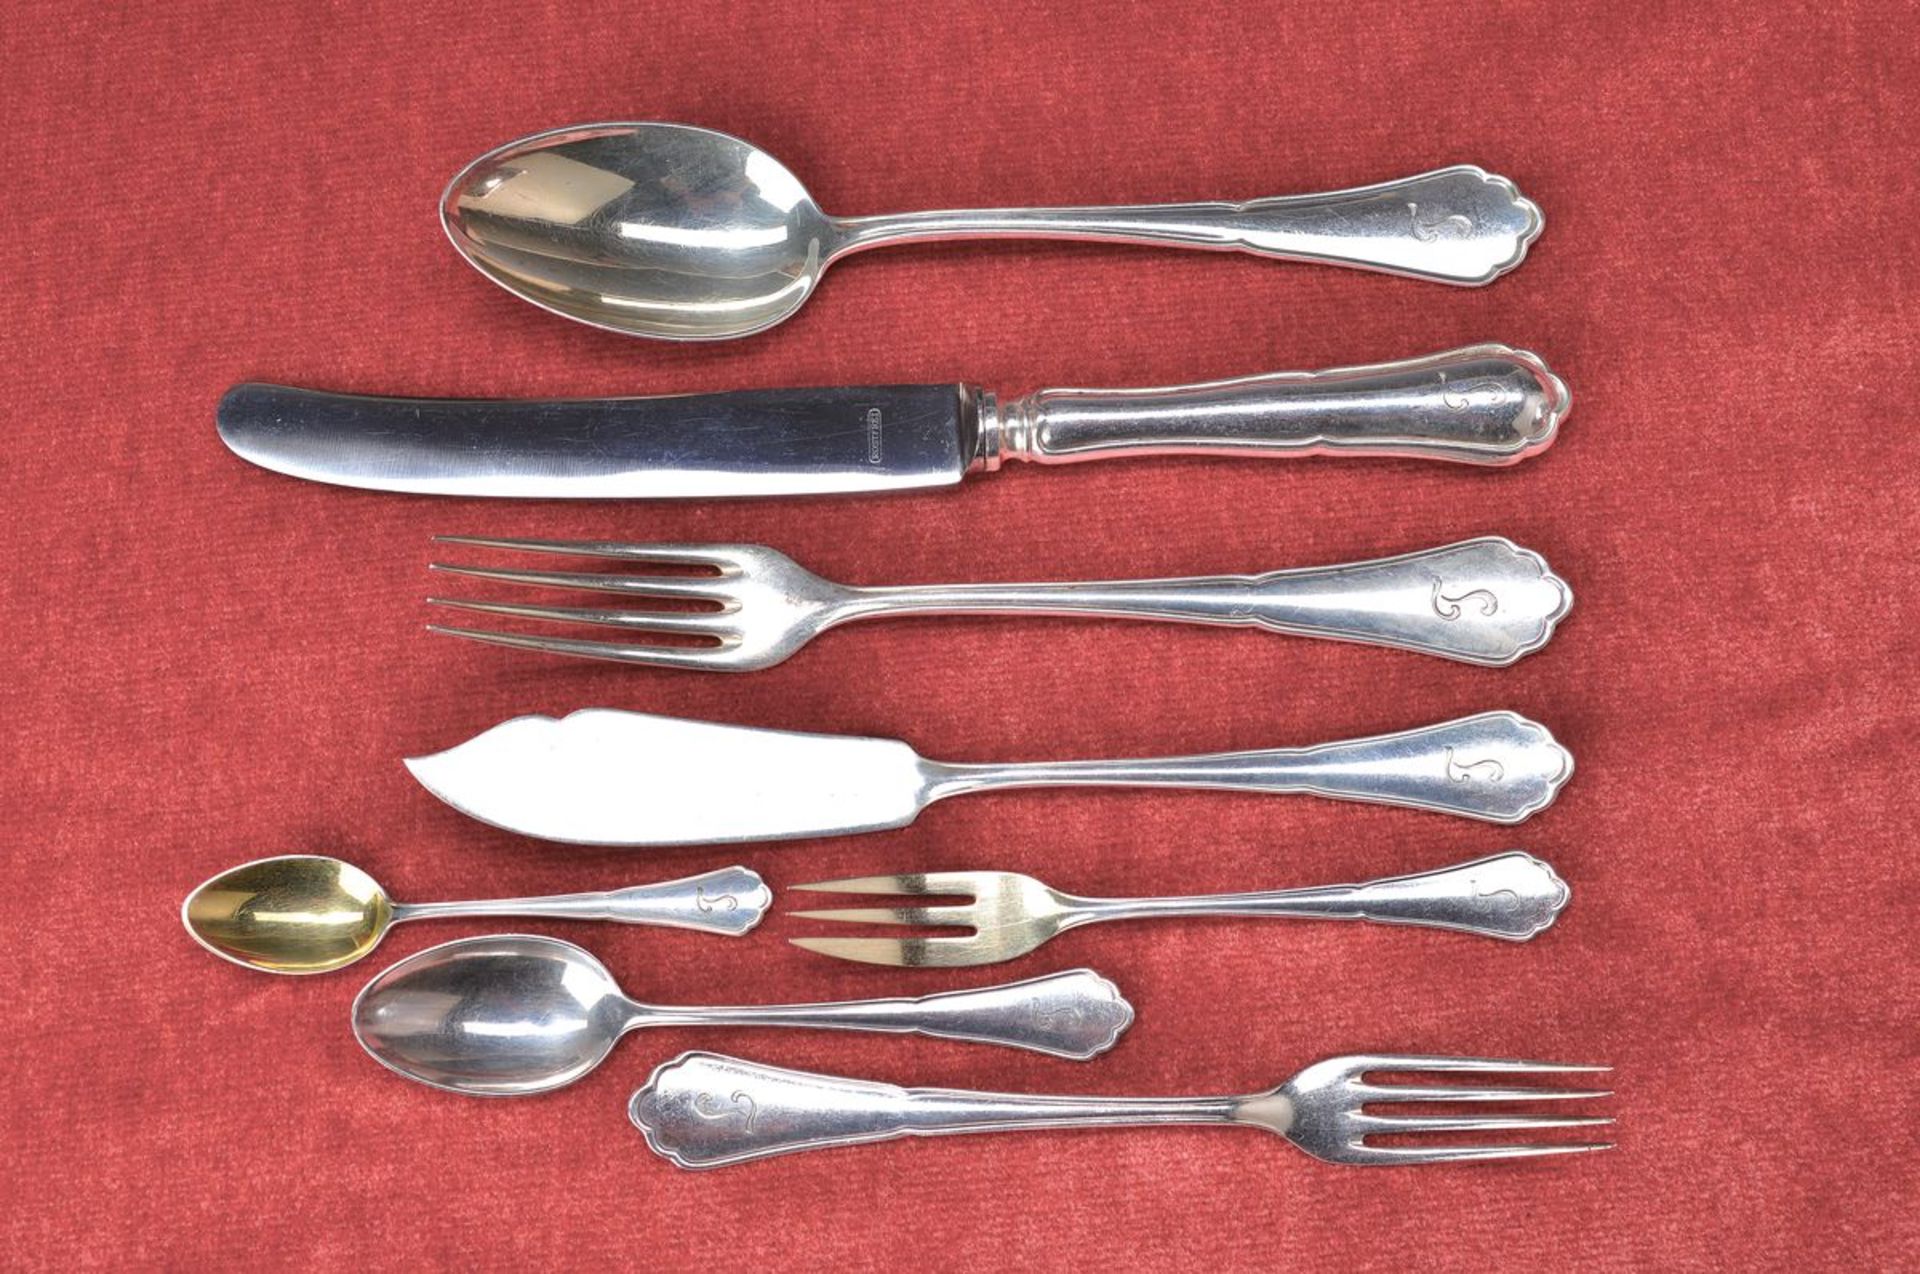 Flatware, German, Robbe and Berking, 800 silver, Baroque style, with engraved owner's monogram T, 12